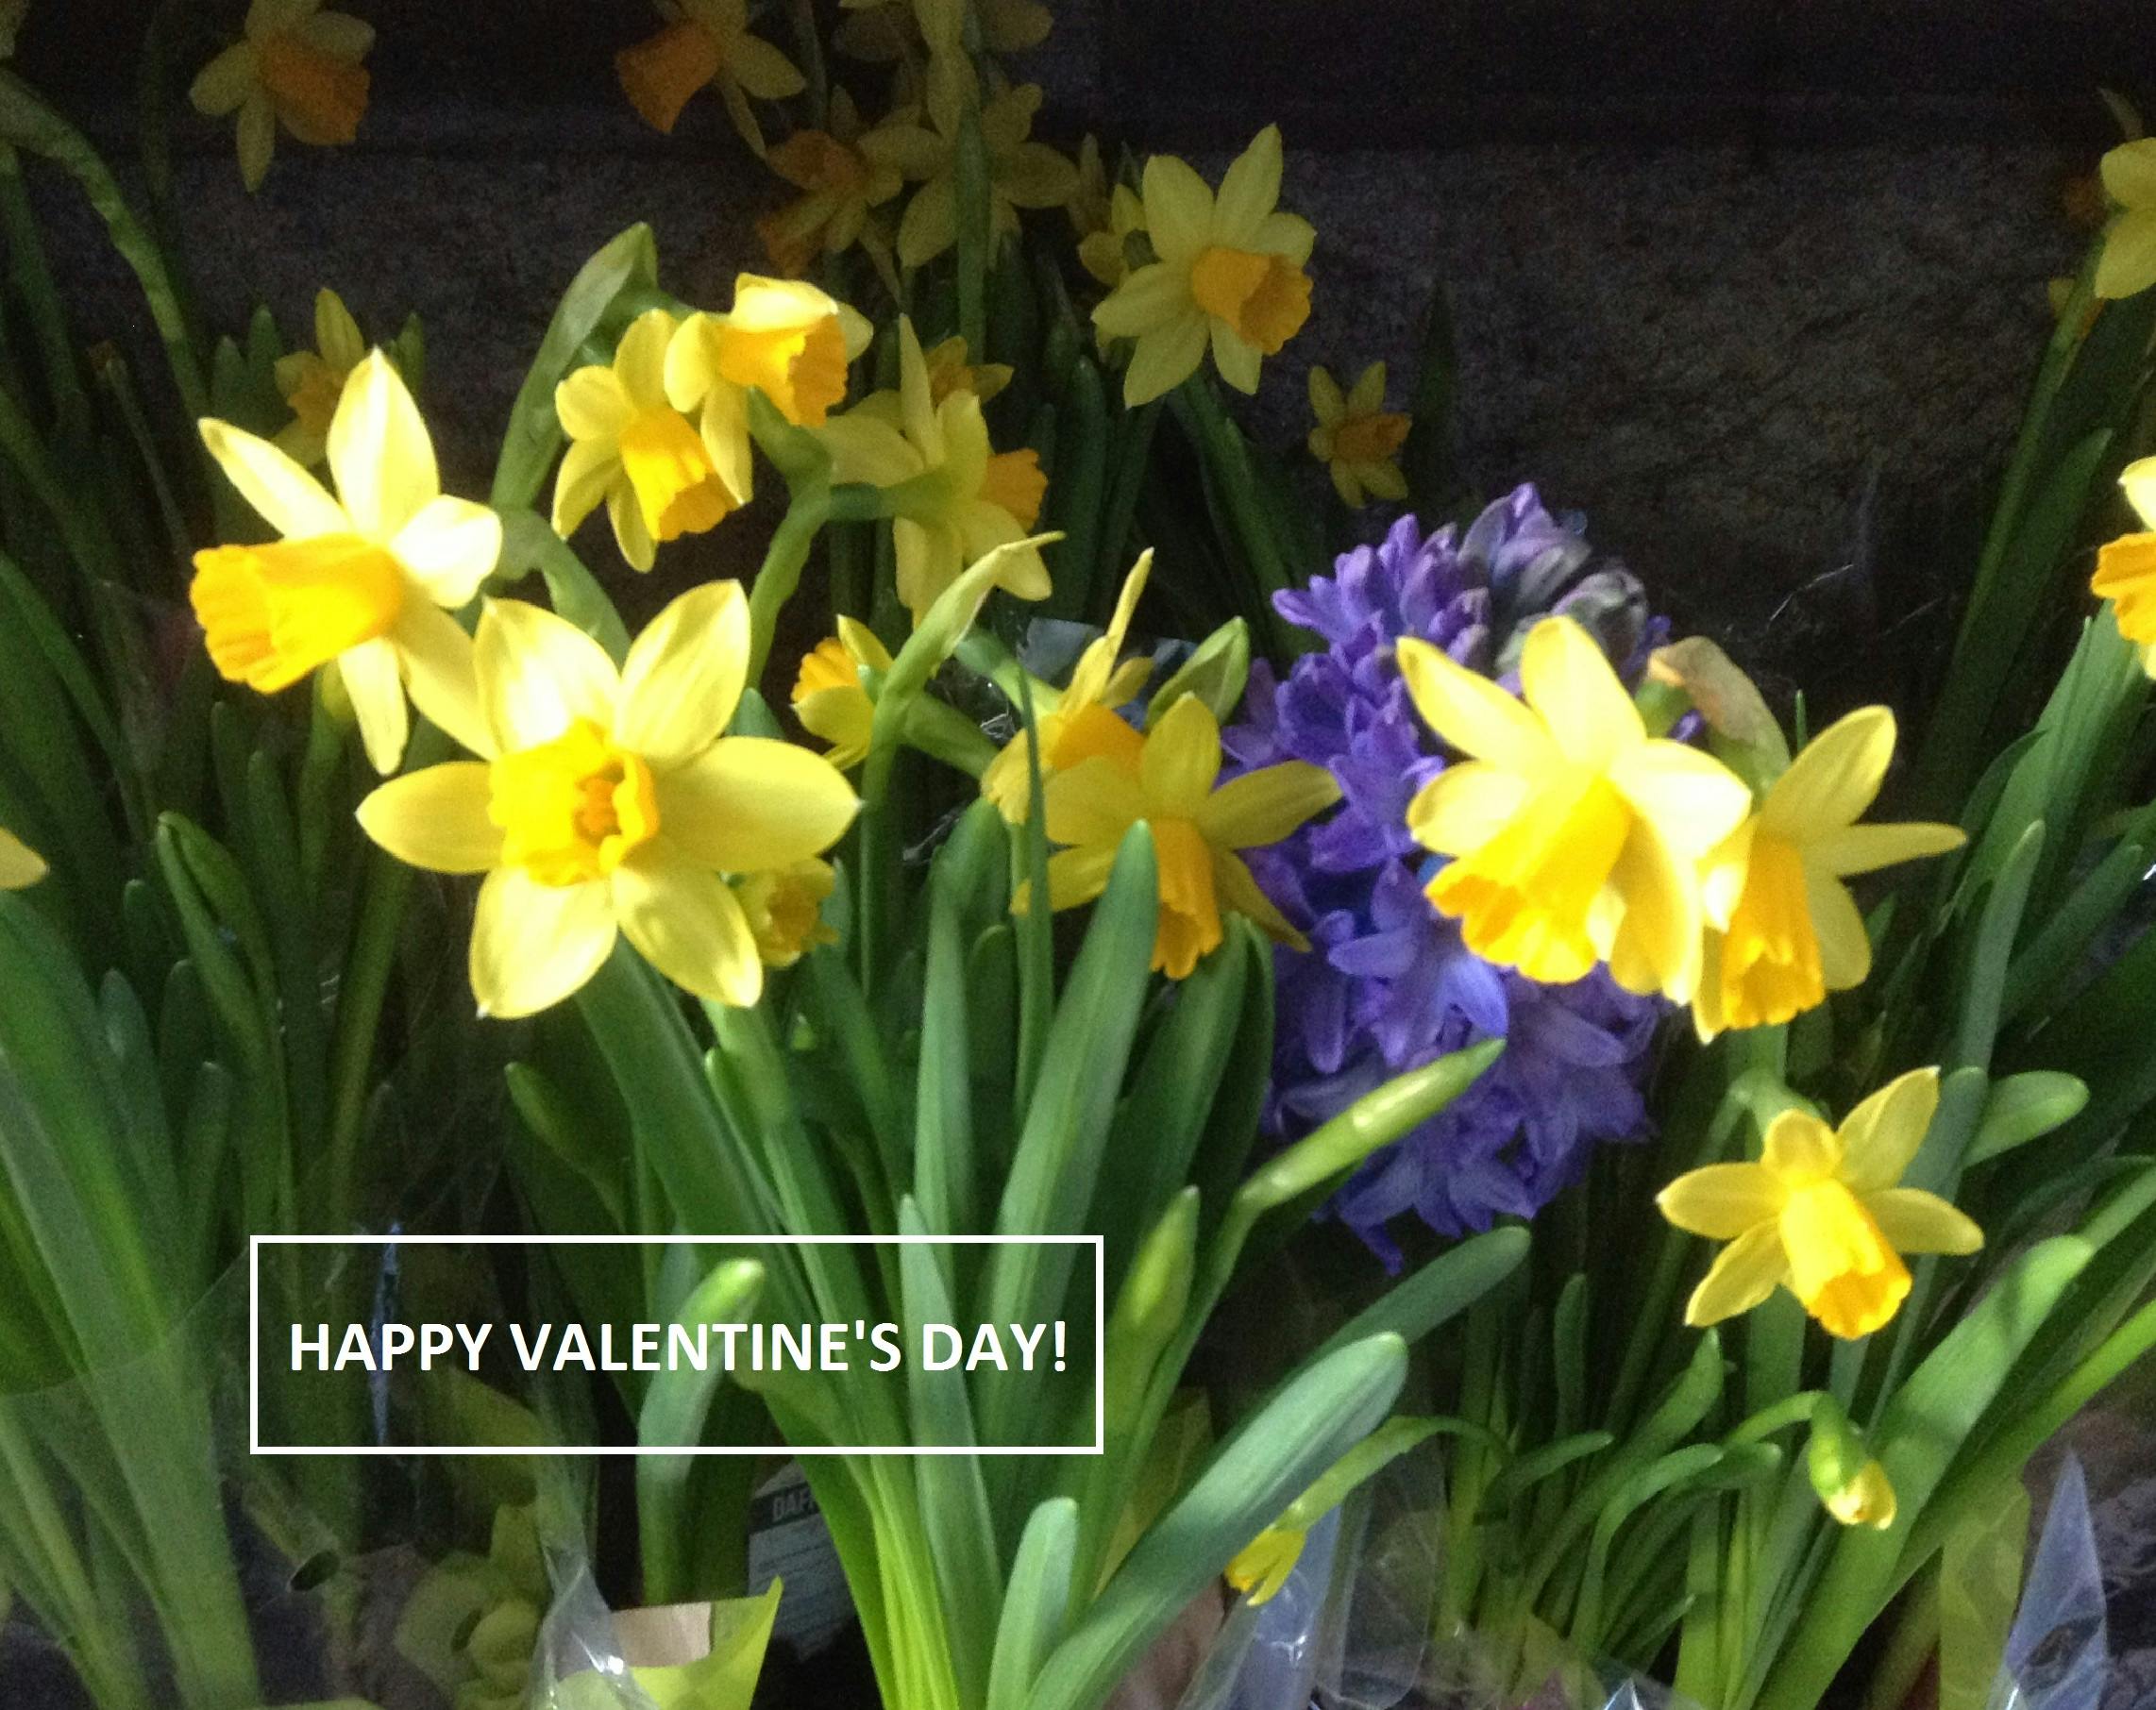 Free stock photo of daffodils yellow hyacinths flowers love, valentine\'s day